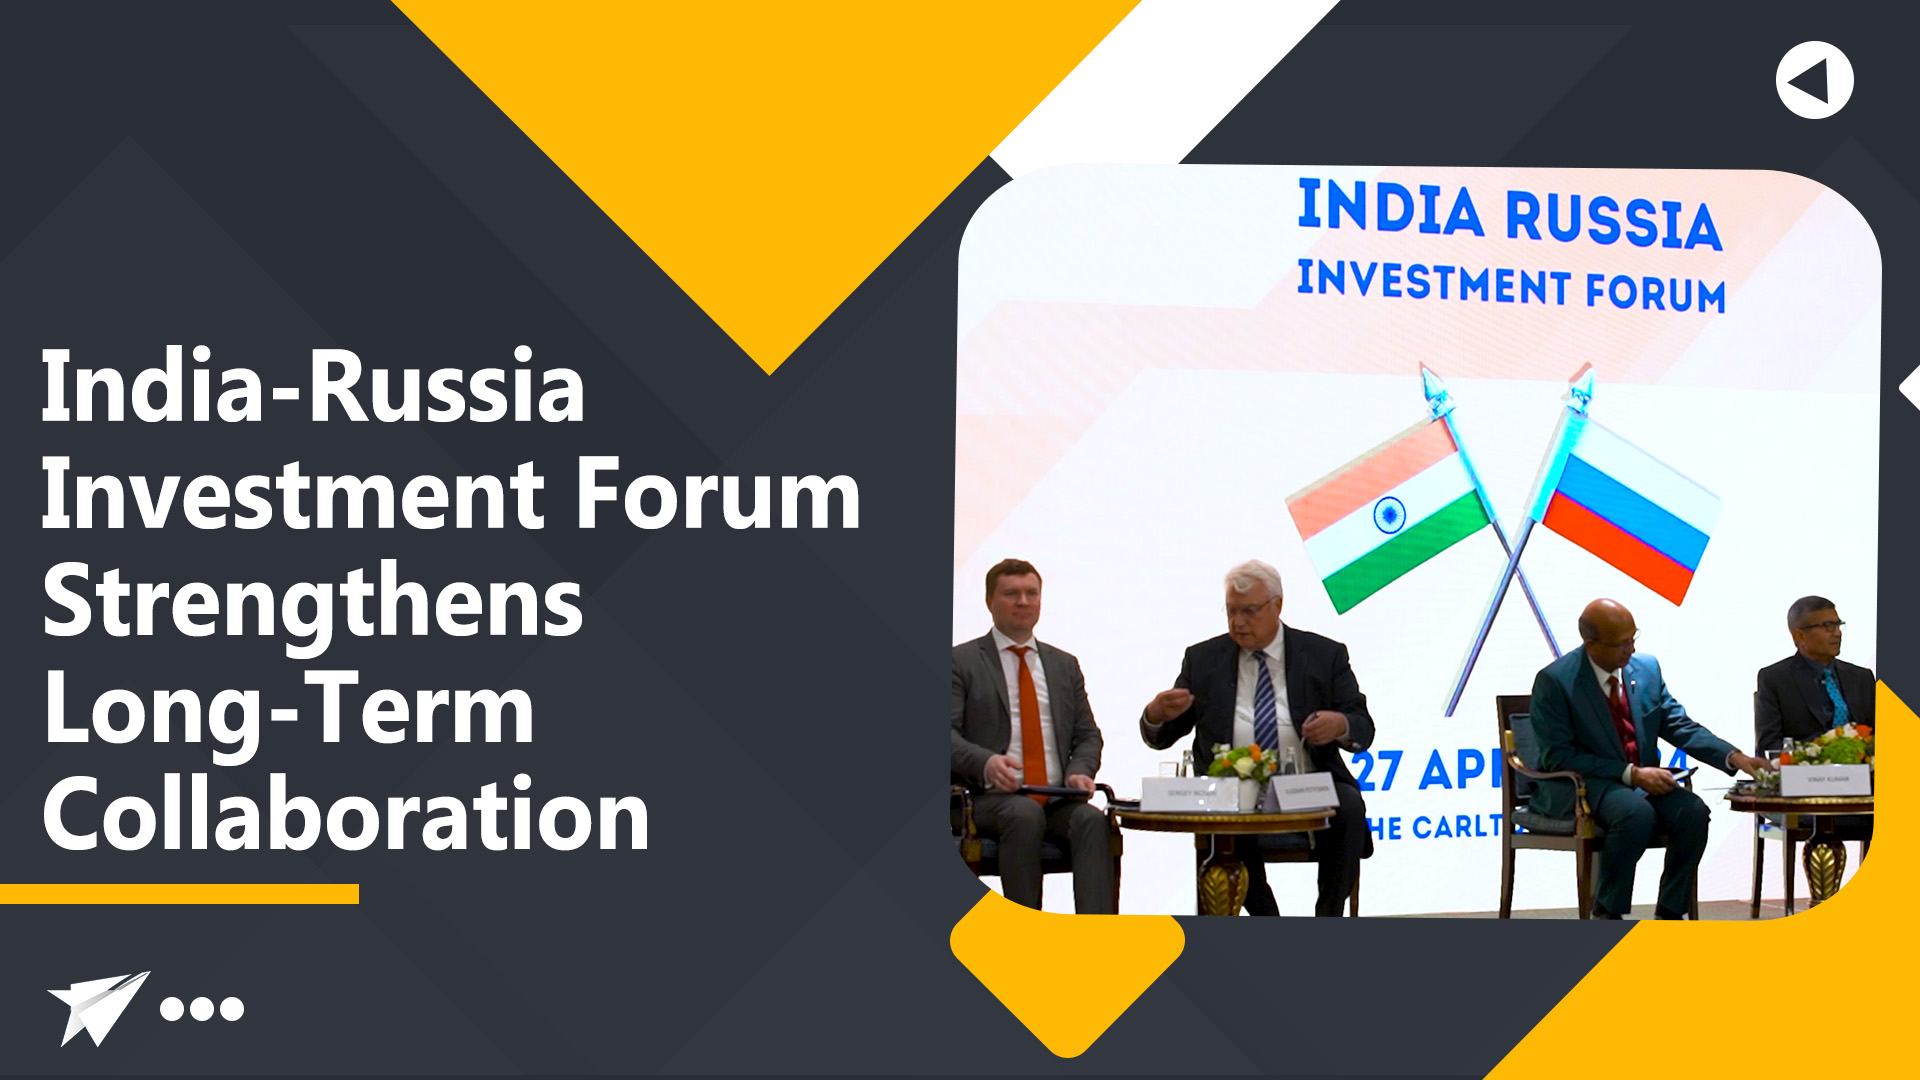 India-Russia Investment Forum Strengthens Long-Term Collaboration